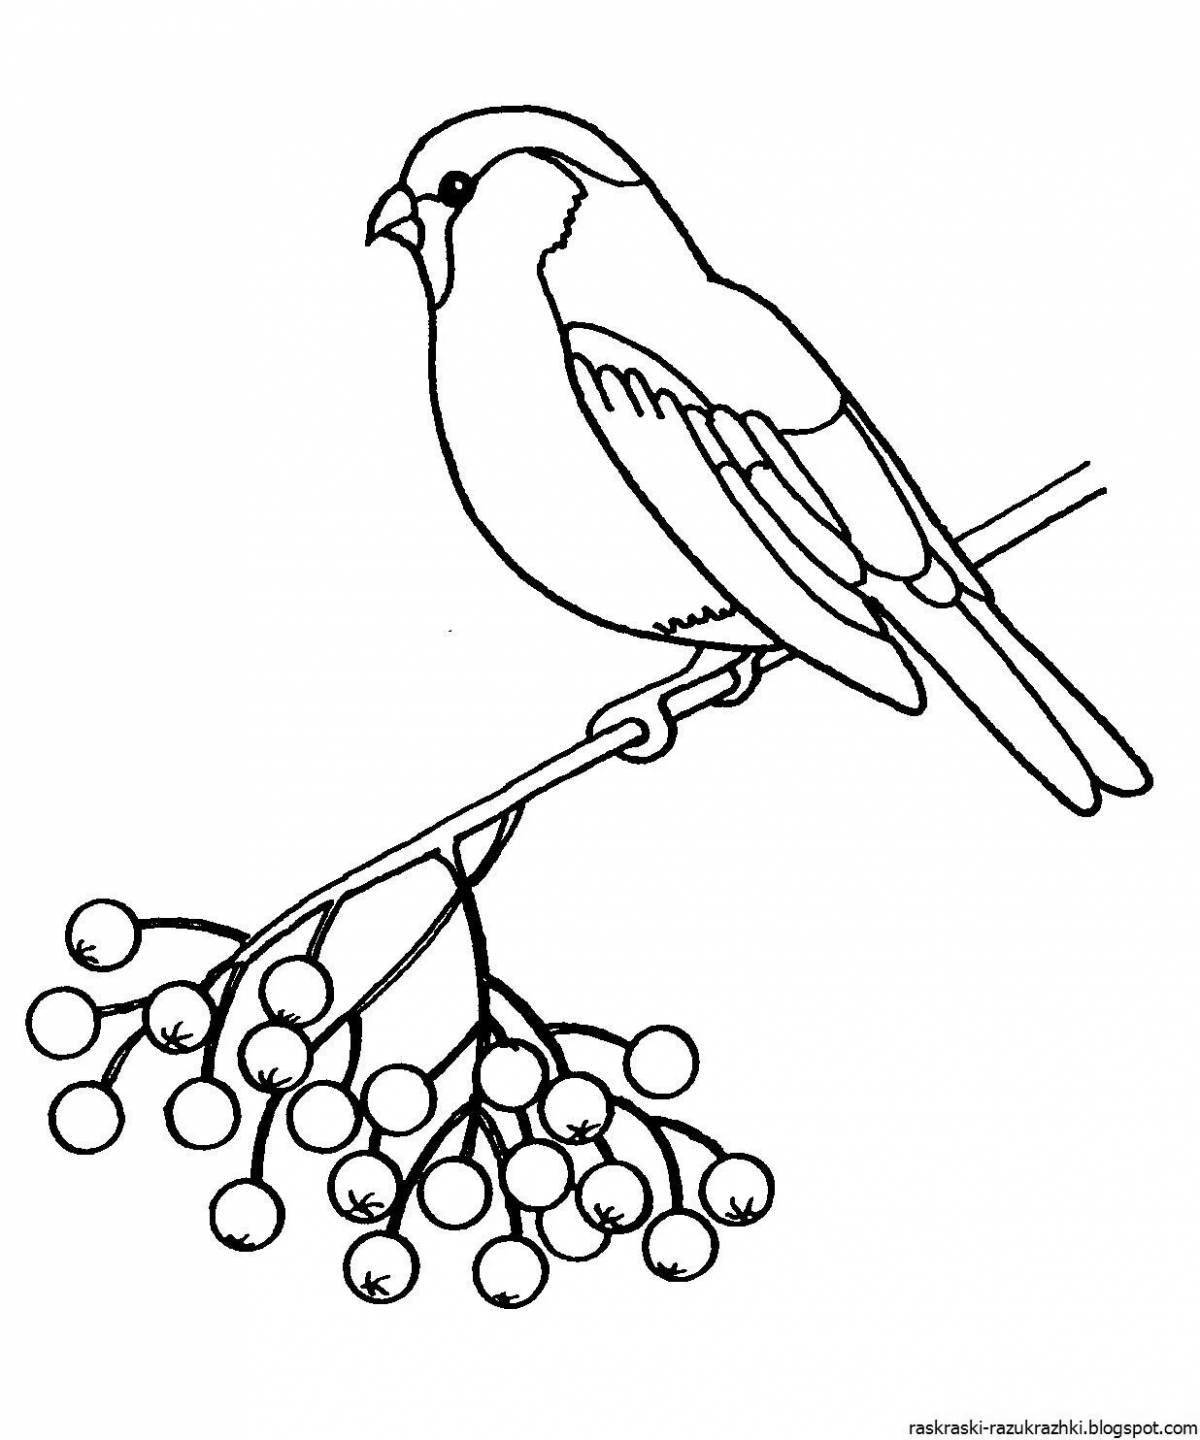 Bright drawing of a bullfinch for children